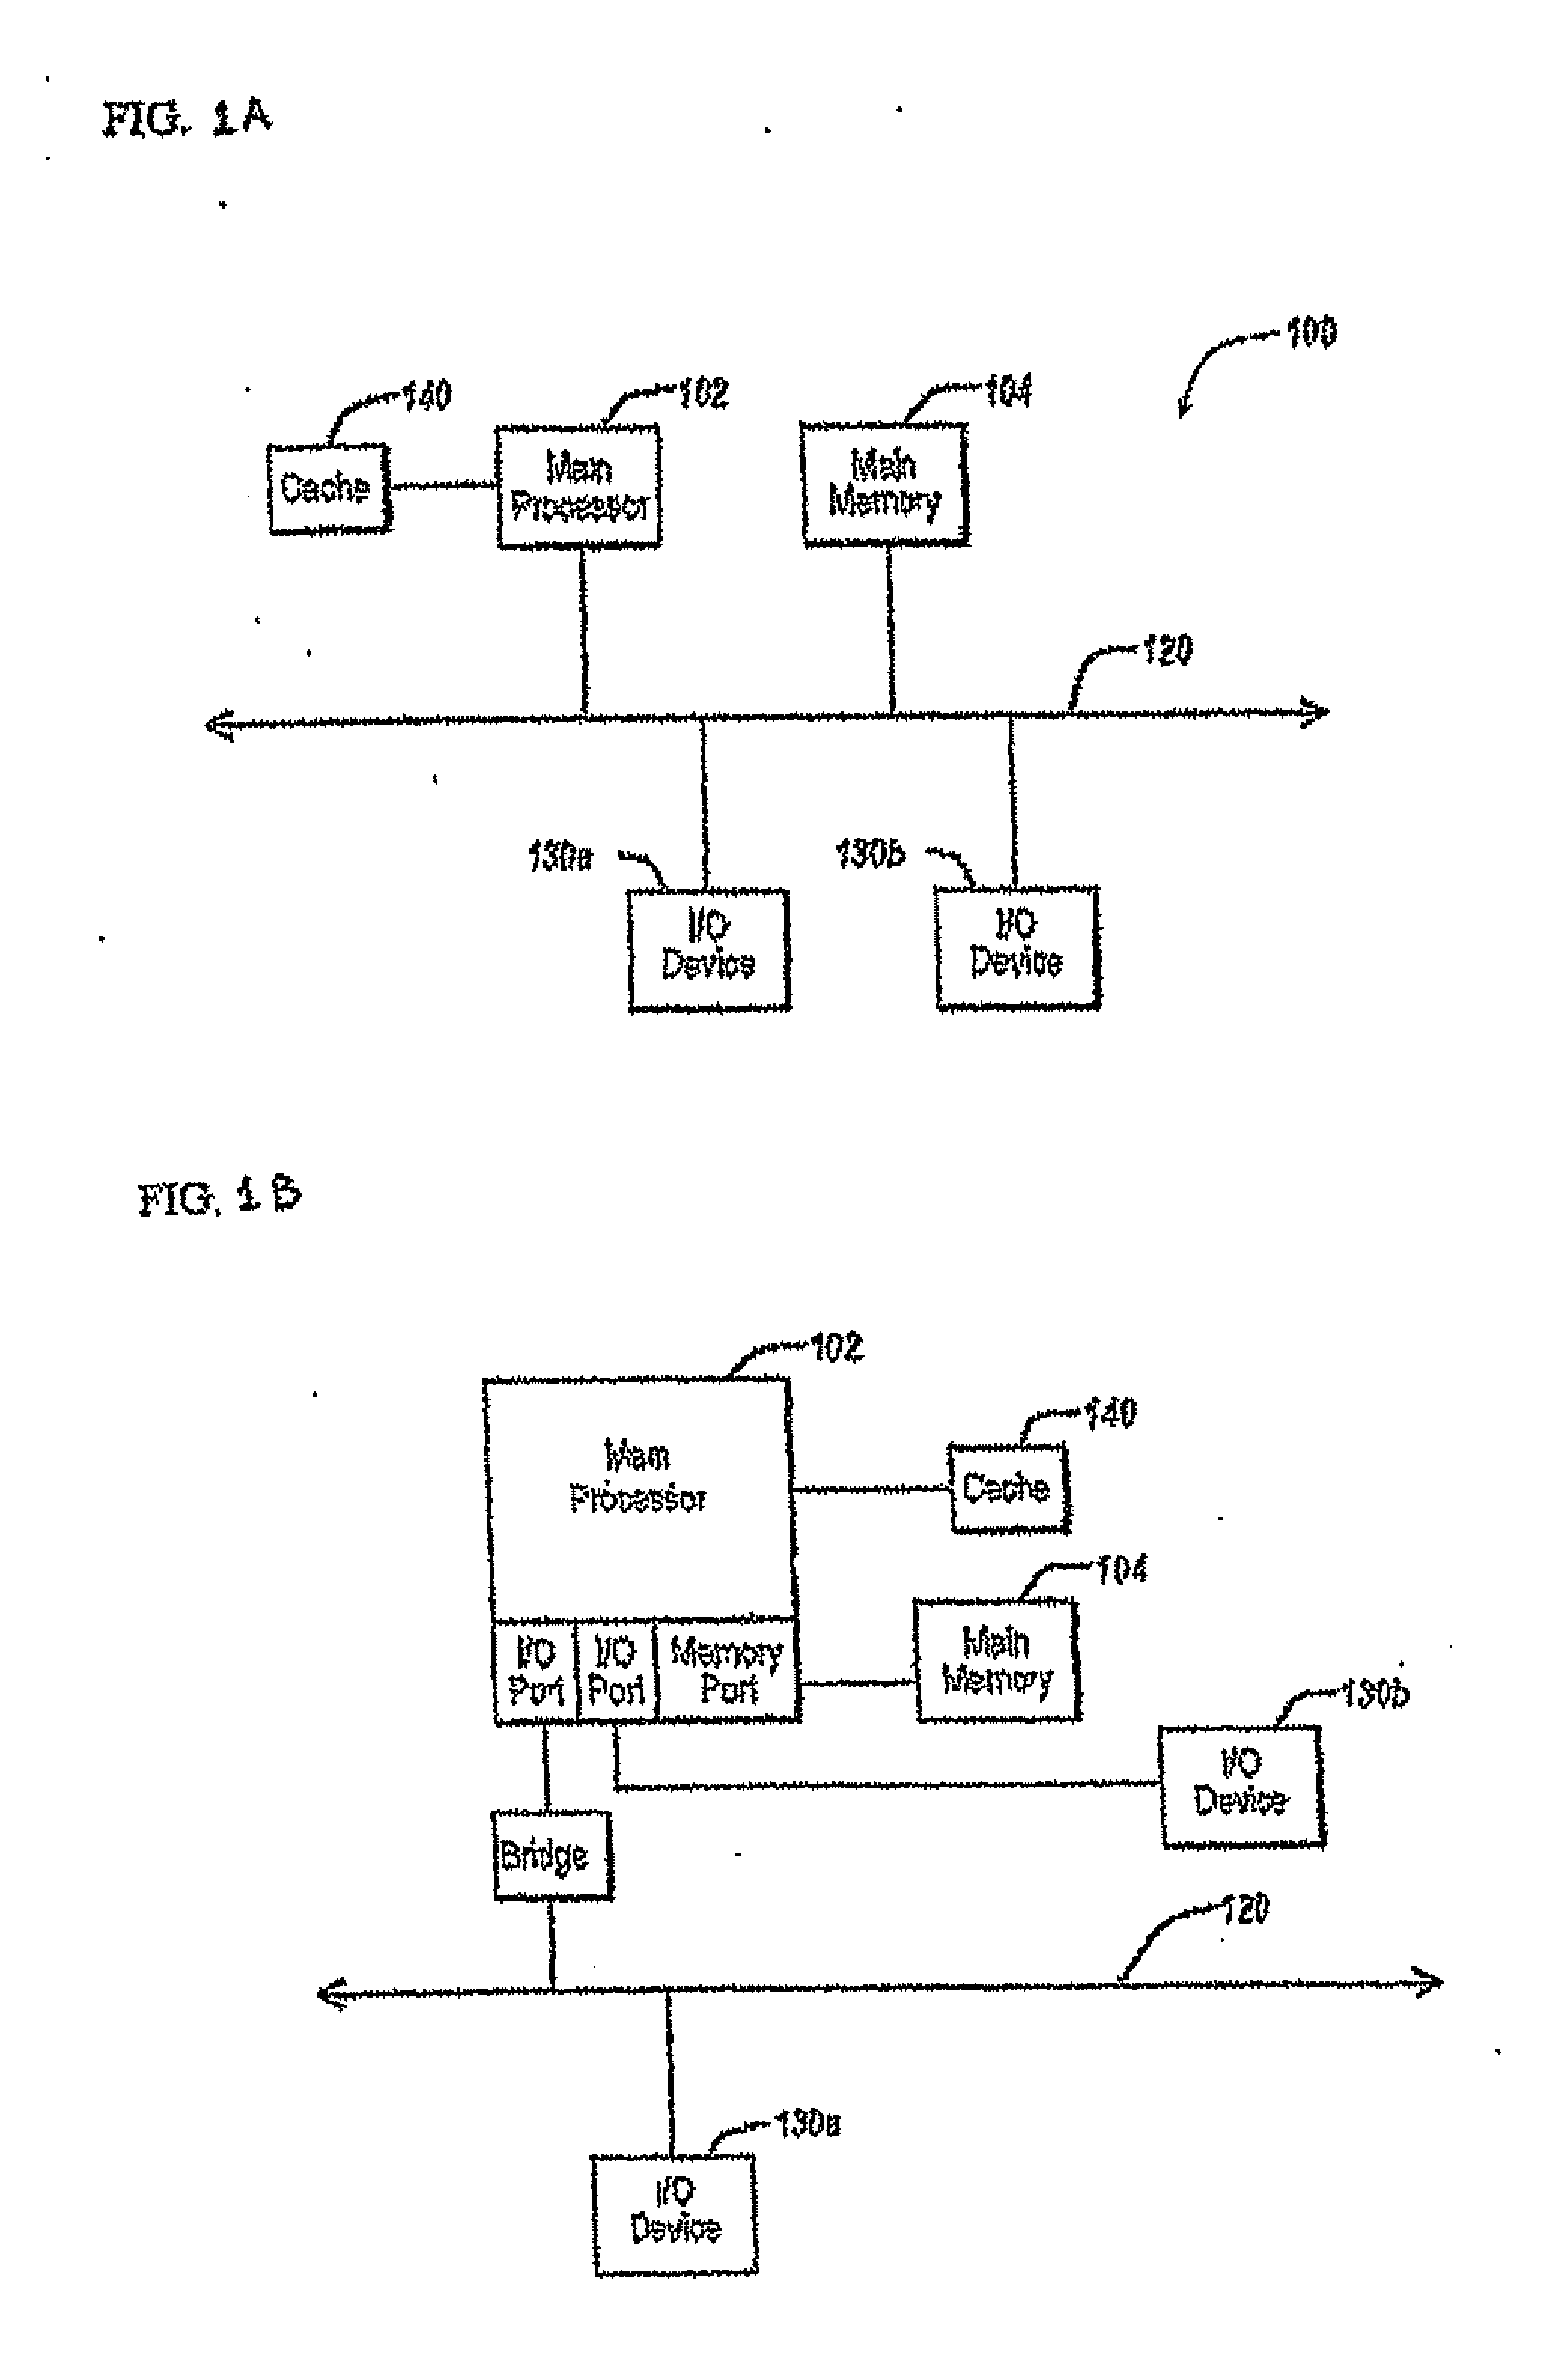 Methods and systems for interacting, via a hypermedium page, with a virtual machine